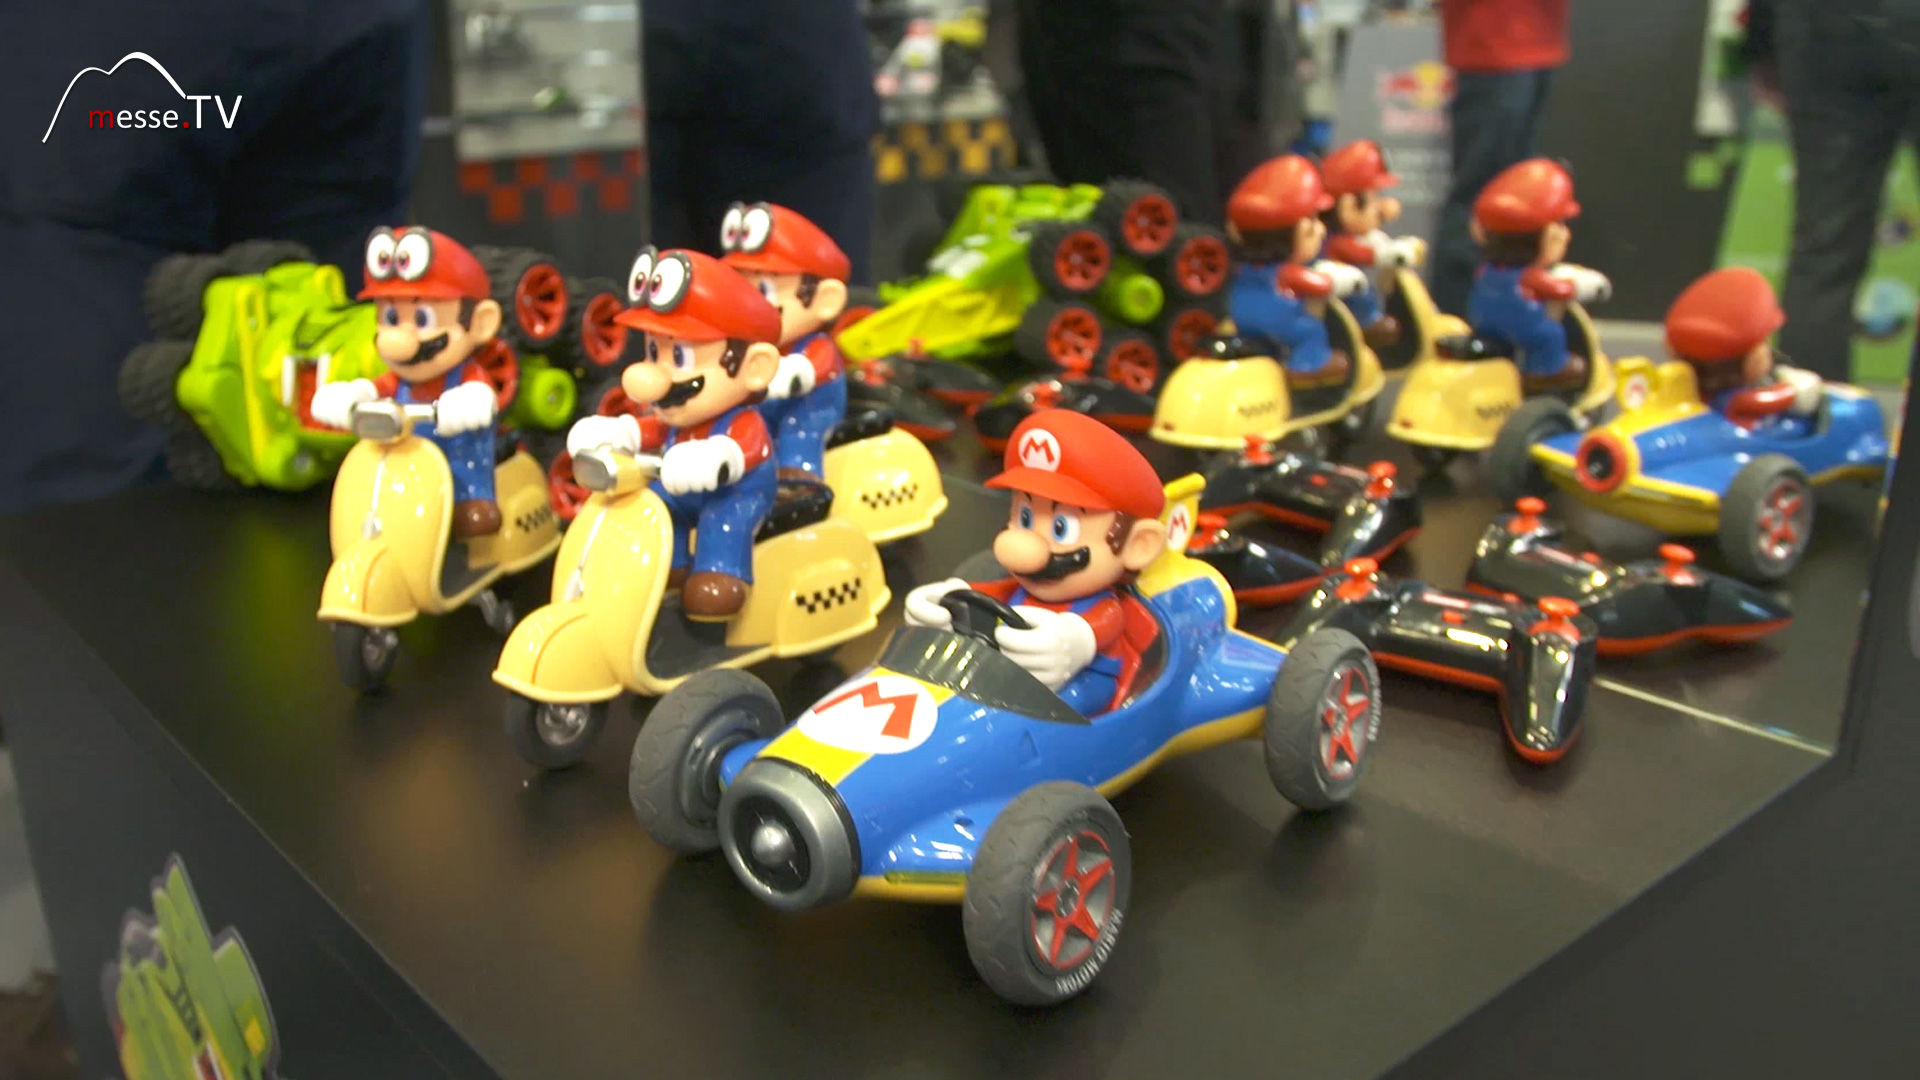 CarreraRC remote controlled Supermario scooter Spielwarenmesse